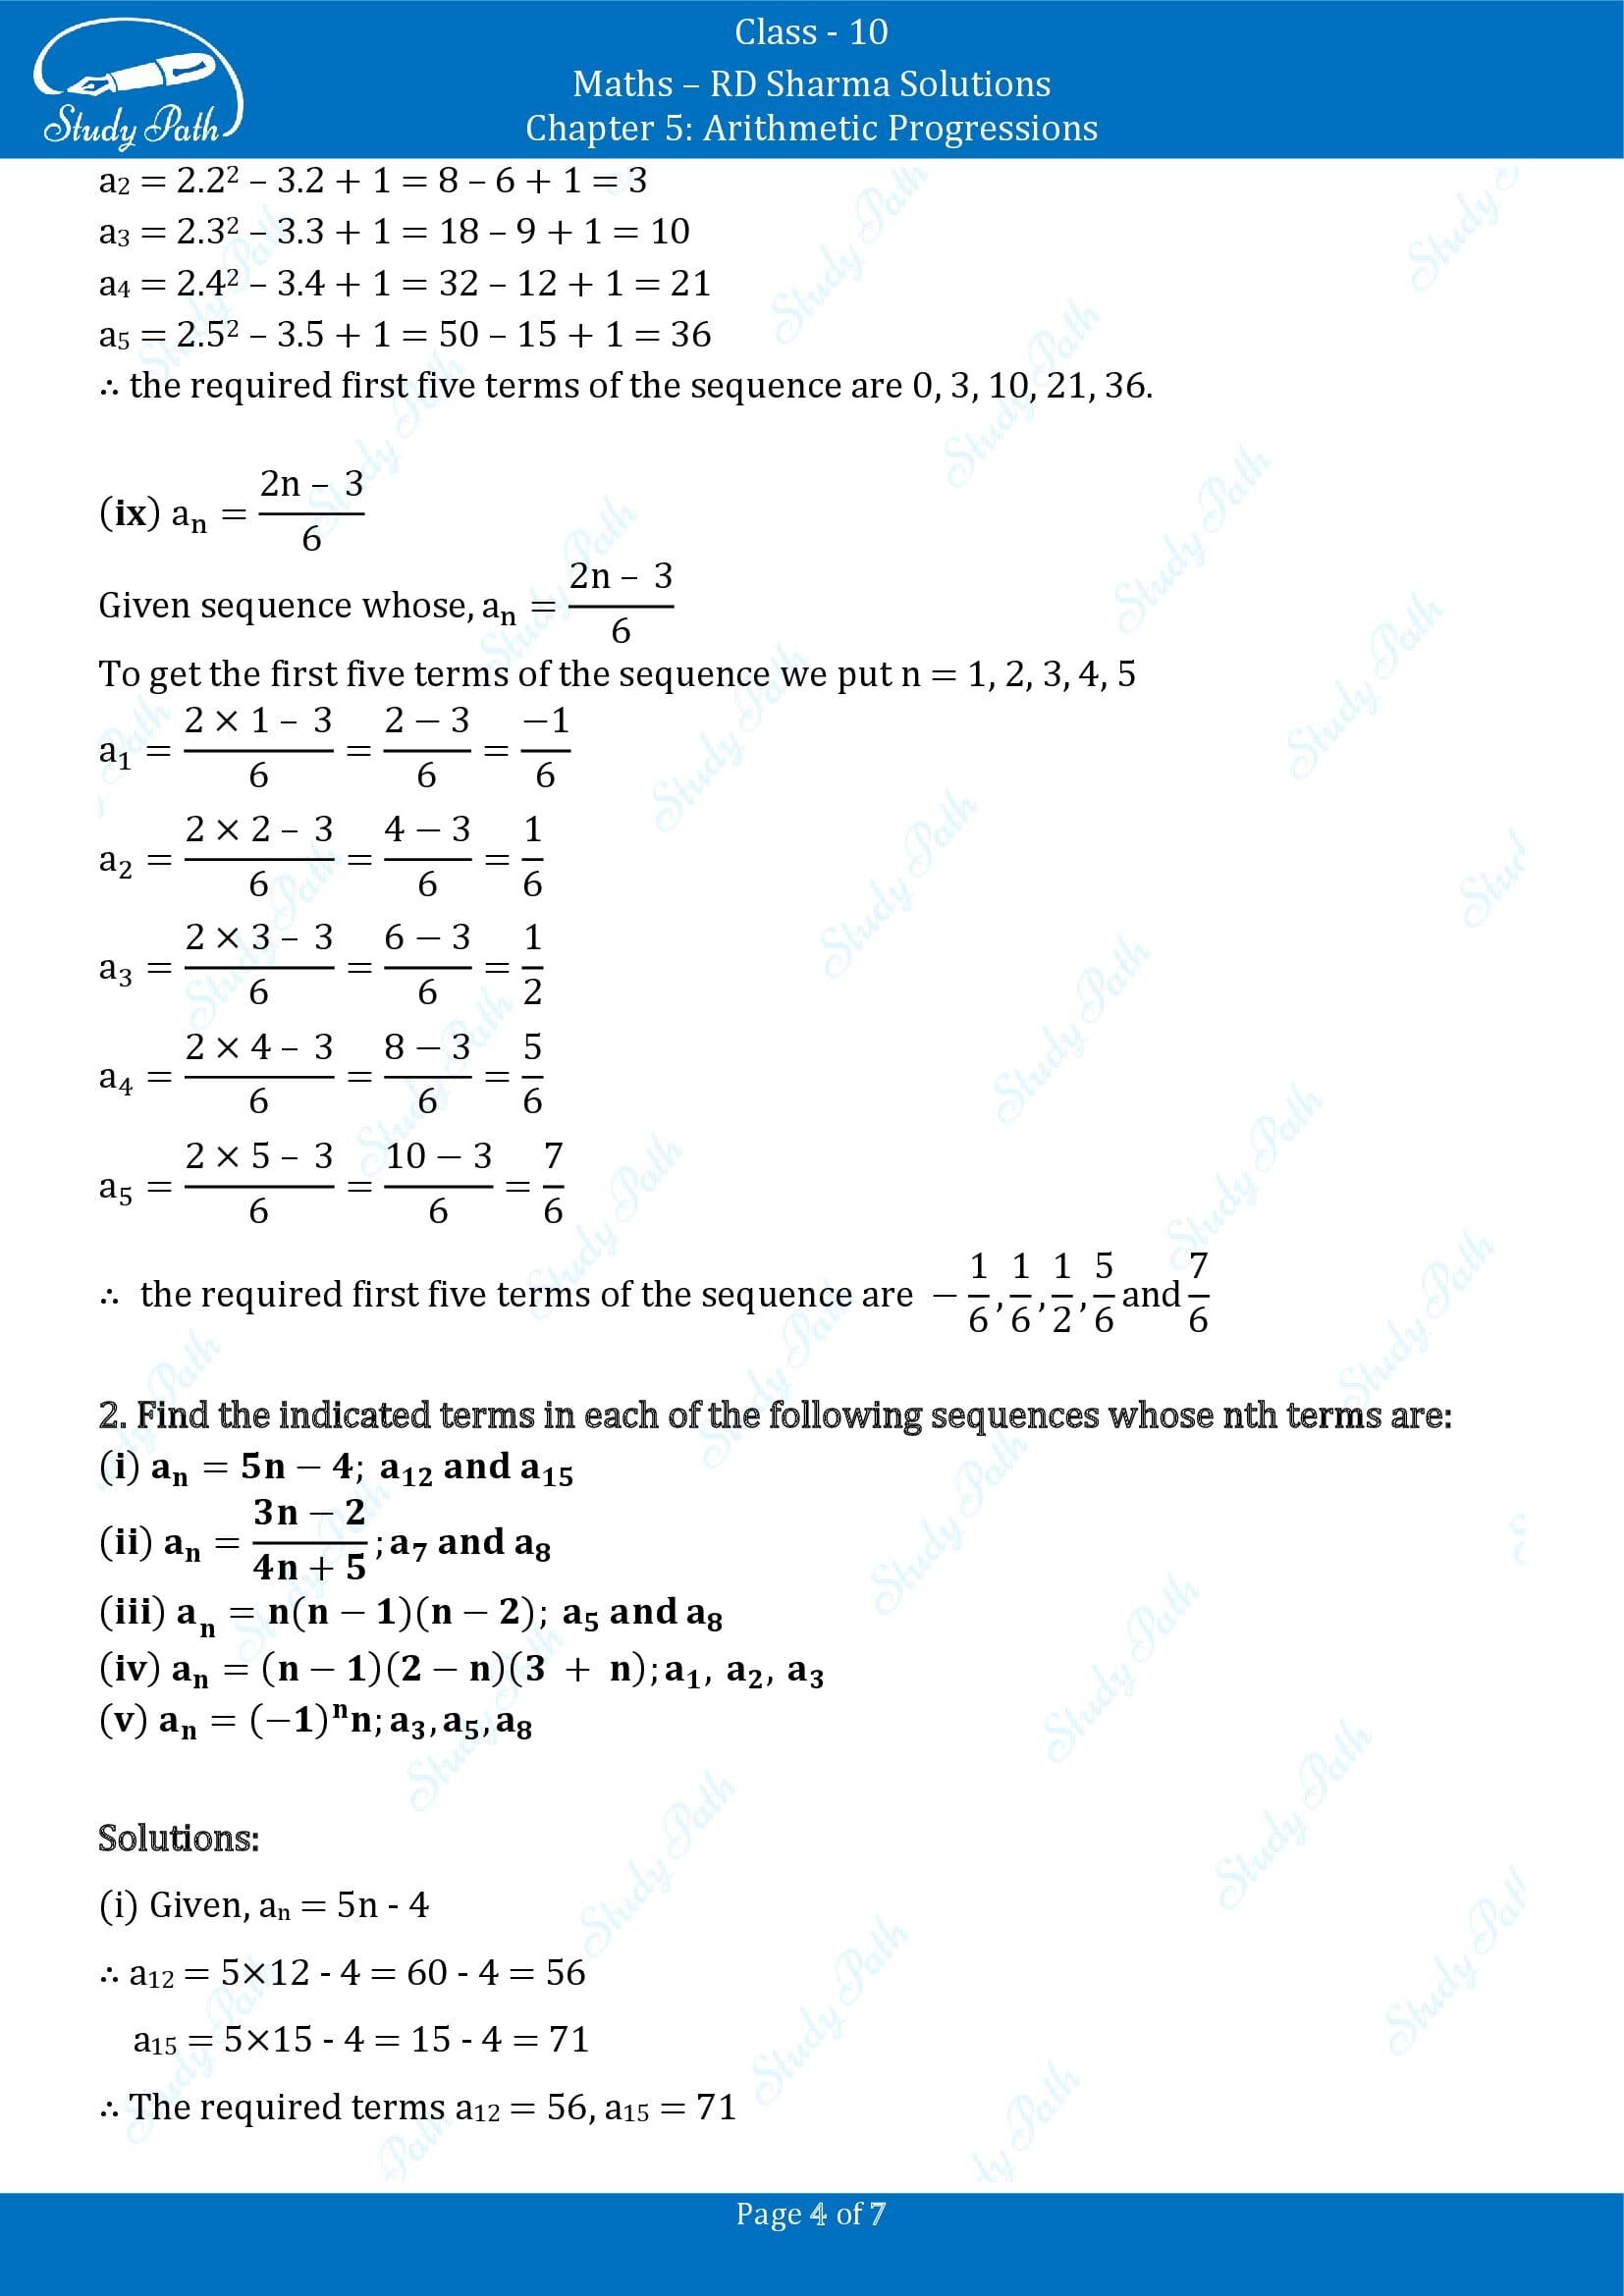 RD Sharma Solutions Class 10 Chapter 5 Arithmetic Progressions Exercise 5.1 00004